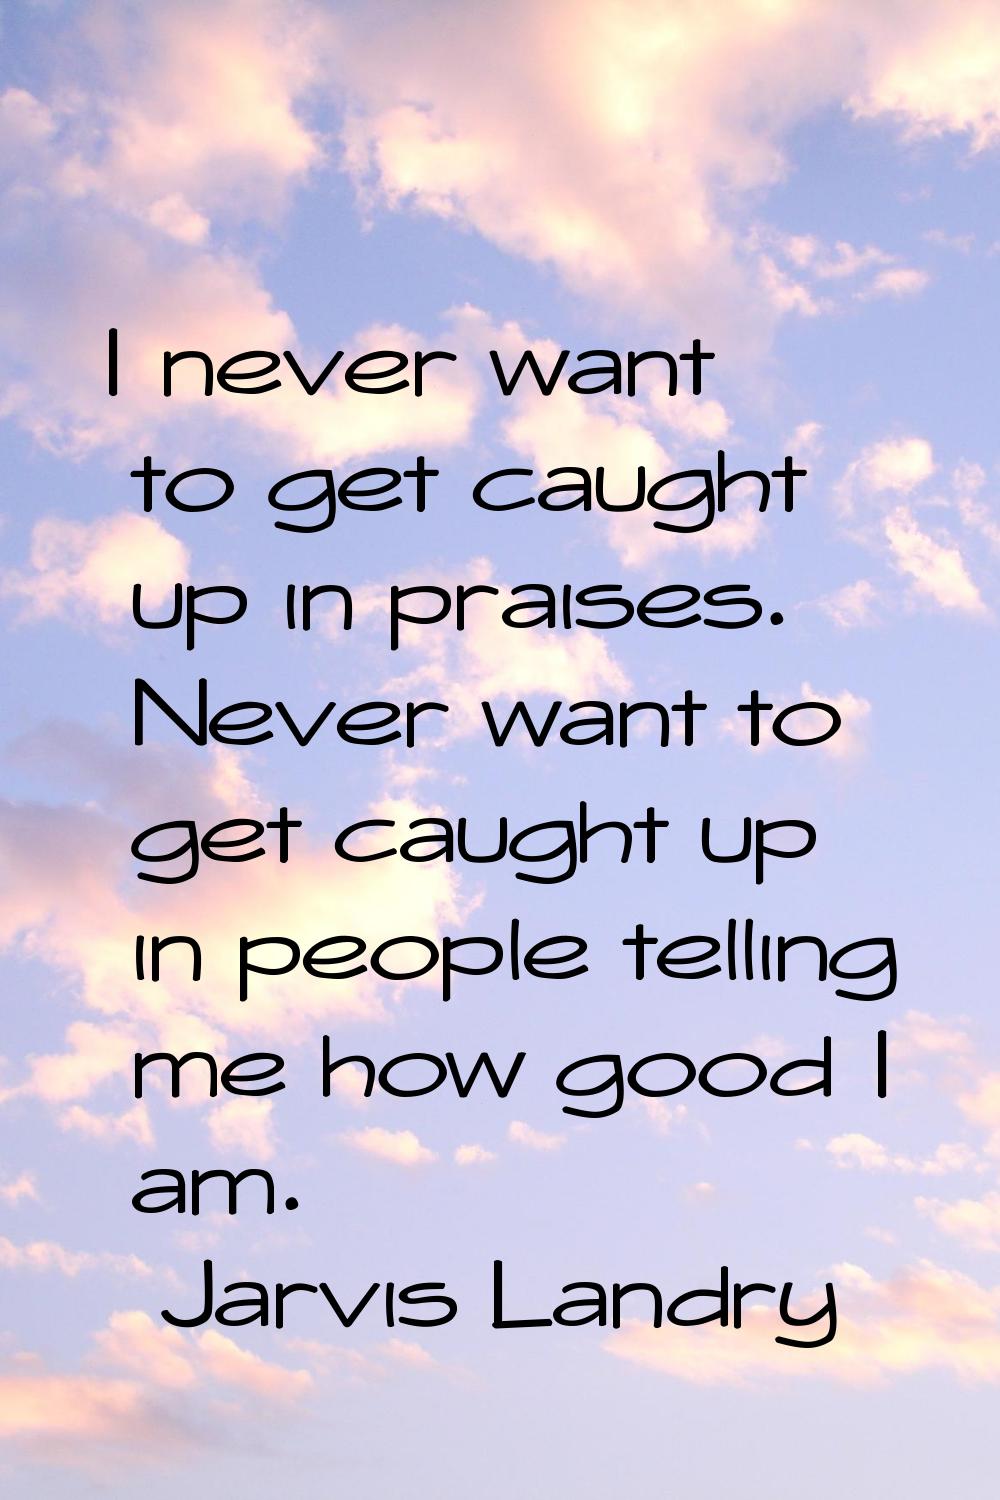 I never want to get caught up in praises. Never want to get caught up in people telling me how good